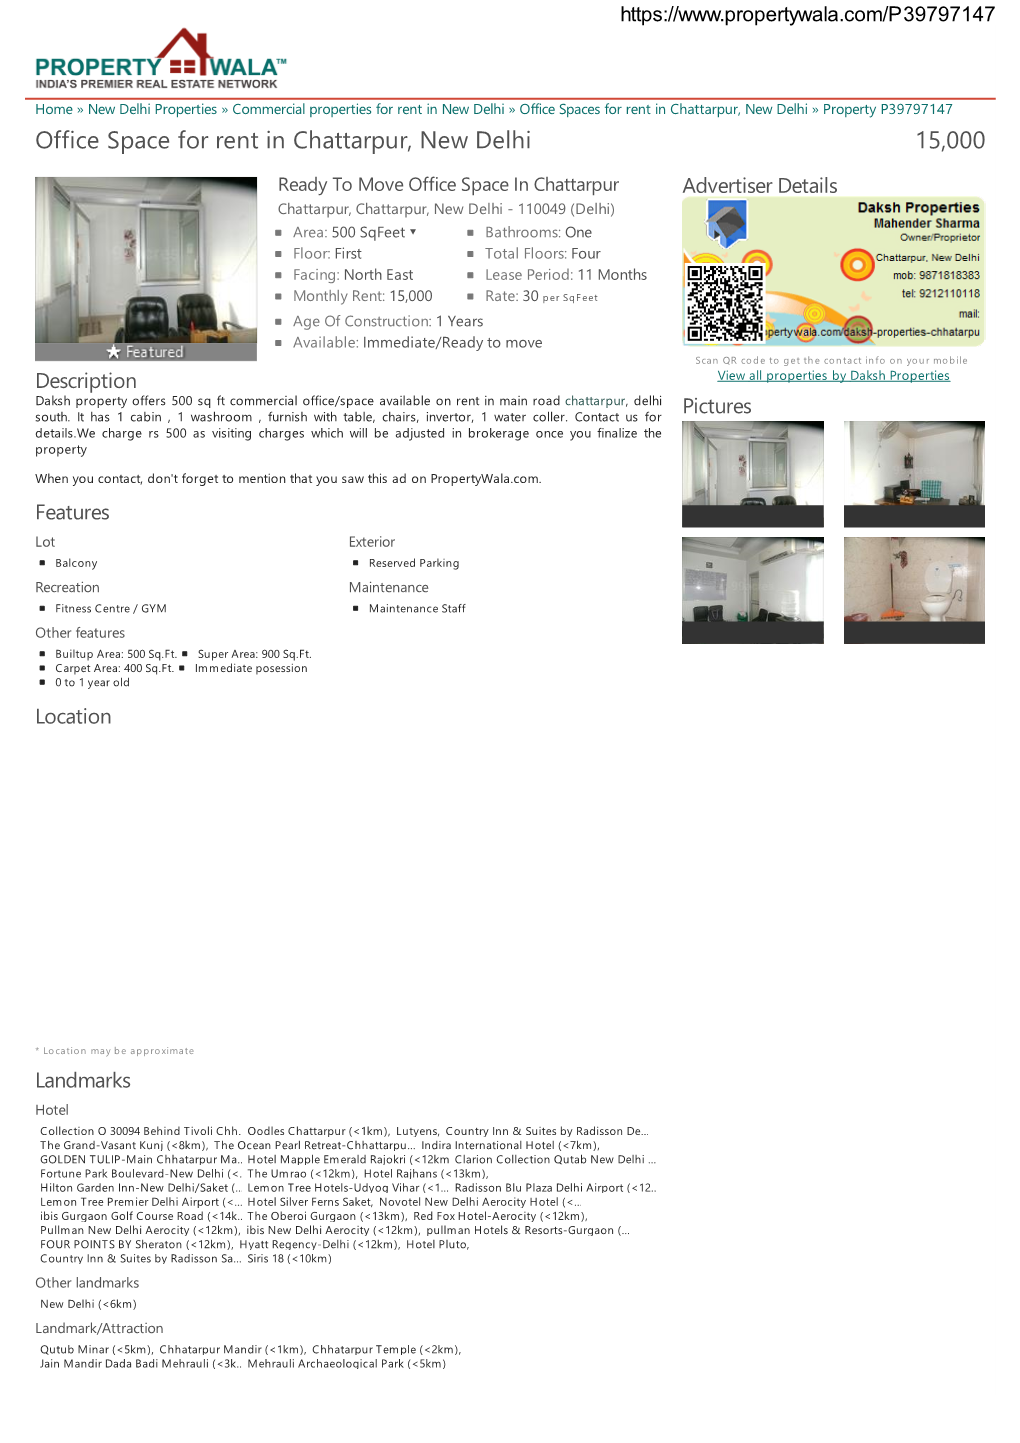 Office Space for Rent in Chattarpur, New Delhi